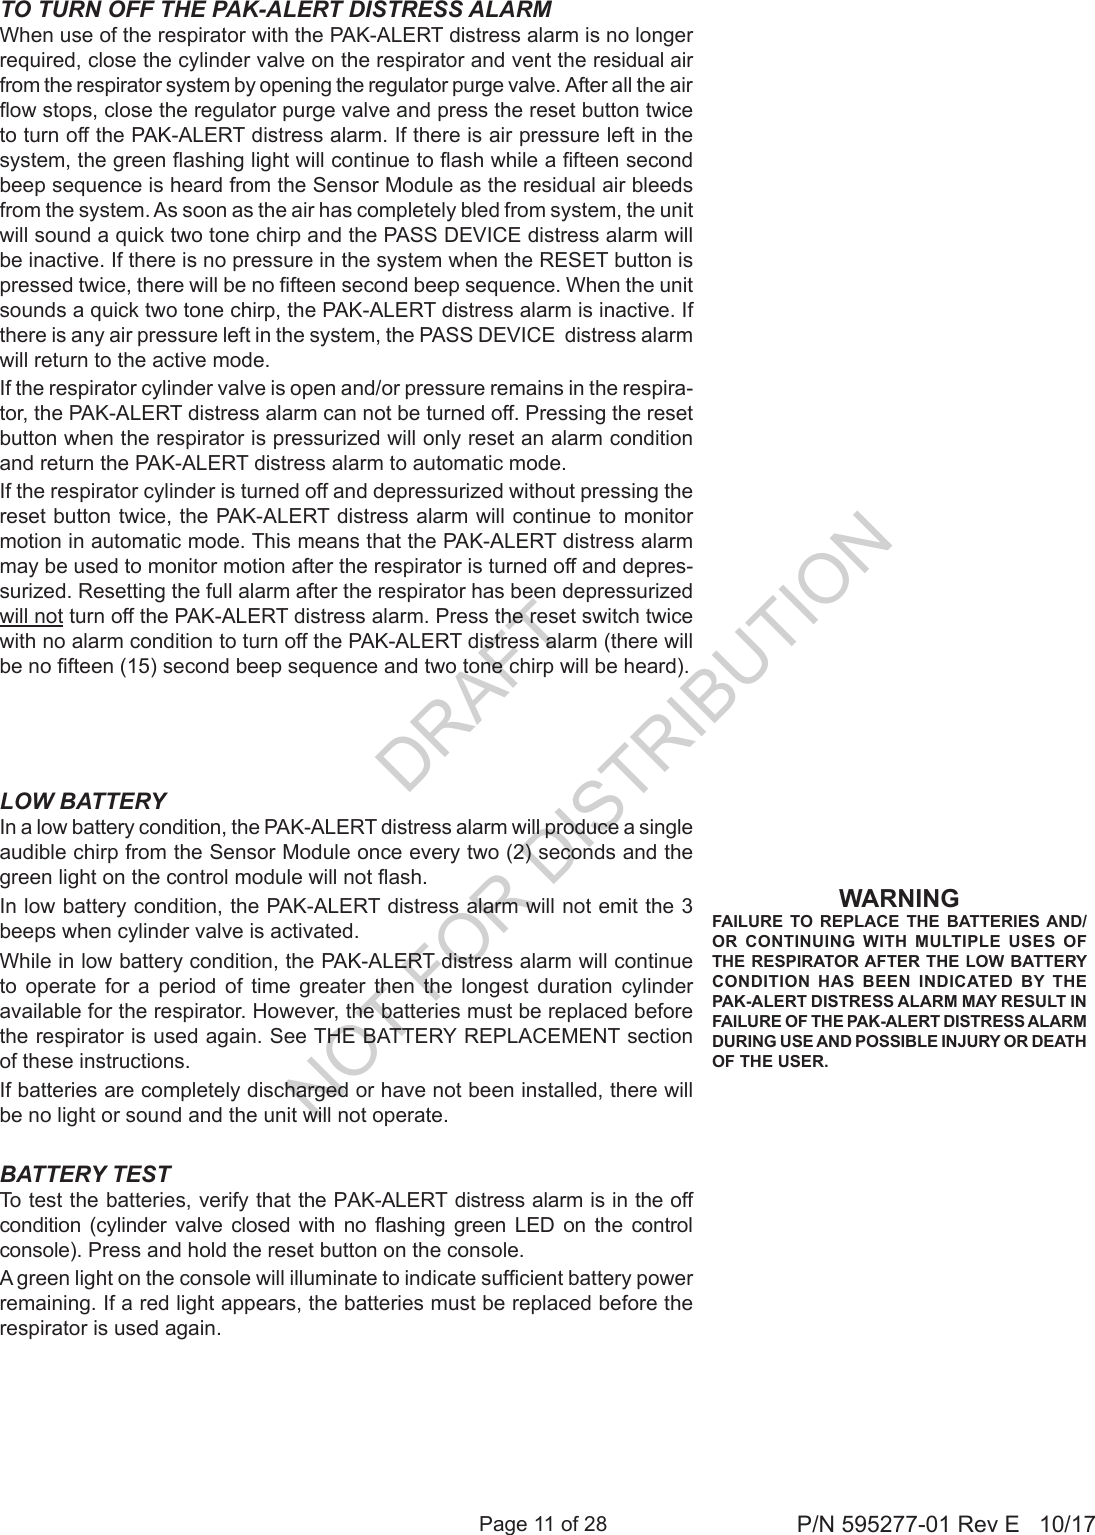 Page 11 of 28 P/N 595277-01 Rev E   10/17WARNINGFAILURE TO REPLACE THE BATTERIES AND/OR CONTINUING WITH MULTIPLE USES OF THE RESPIRATOR AFTER THE LOW BATTERY CONDITION HAS BEEN INDICATED BY THE PAK-ALERT DISTRESS ALARM MAY RESULT IN FAILURE OF THE PAK-ALERT DISTRESS ALARM DURING USE AND POSSIBLE INJURY OR DEATH OF THE USER.LOW BATTERYIn a low battery condition, the PAK-ALERT distress alarm will produce a single audible chirp from the Sensor Module once every two (2) seconds and the green light on the control module will not ash. In low battery condition, the PAK-ALERT distress alarm will not emit the 3 beeps when cylinder valve is activated.While in low battery condition, the PAK-ALERT distress alarm will continue to operate for a period of time greater then the longest duration cylinder available for the respirator. However, the batteries must be replaced before the respirator is used again. See THE BATTERY REPLACEMENT section of these instructions.If batteries are completely discharged or have not been installed, there will be no light or sound and the unit will not operate.BATTERY TESTTo test the batteries, verify that the PAK-ALERT distress alarm is in the off condition  (cylinder valve  closed  with  no  ashing  green  LED  on  the  control console). Press and hold the reset button on the console.A green light on the console will illuminate to indicate sufcient battery power remaining. If a red light appears, the batteries must be replaced before the respirator is used again.TO TURN OFF THE PAK-ALERT DISTRESS ALARMWhen use of the respirator with the PAK-ALERT distress alarm is no longer required, close the cylinder valve on the respirator and vent the residual air from the respirator system by opening the regulator purge valve. After all the air ow stops, close the regulator purge valve and press the reset button twice to turn off the PAK-ALERT distress alarm. If there is air pressure left in the system, the green ashing light will continue to ash while a fteen second beep sequence is heard from the Sensor Module as the residual air bleeds from the system. As soon as the air has completely bled from system, the unit will sound a quick two tone chirp and the PASS DEVICE distress alarm will be inactive. If there is no pressure in the system when the RESET button is pressed twice, there will be no fteen second beep sequence. When the unit sounds a quick two tone chirp, the PAK-ALERT distress alarm is inactive. If there is any air pressure left in the system, the PASS DEVICE  distress alarm will return to the active mode.If the respirator cylinder valve is open and/or pressure remains in the respira-tor, the PAK-ALERT distress alarm can not be turned off. Pressing the reset button when the respirator is pressurized will only reset an alarm condition and return the PAK-ALERT distress alarm to automatic mode.If the respirator cylinder is turned off and depressurized without pressing the reset button twice, the PAK-ALERT distress alarm will continue to monitor motion in automatic mode. This means that the PAK-ALERT distress alarm may be used to monitor motion after the respirator is turned off and depres-surized. Resetting the full alarm after the respirator has been depressurized will not turn off the PAK-ALERT distress alarm. Press the reset switch twice with no alarm condition to turn off the PAK-ALERT distress alarm (there will be no fteen (15) second beep sequence and two tone chirp will be heard).DRAFT  NOT FOR DISTRIBUTION